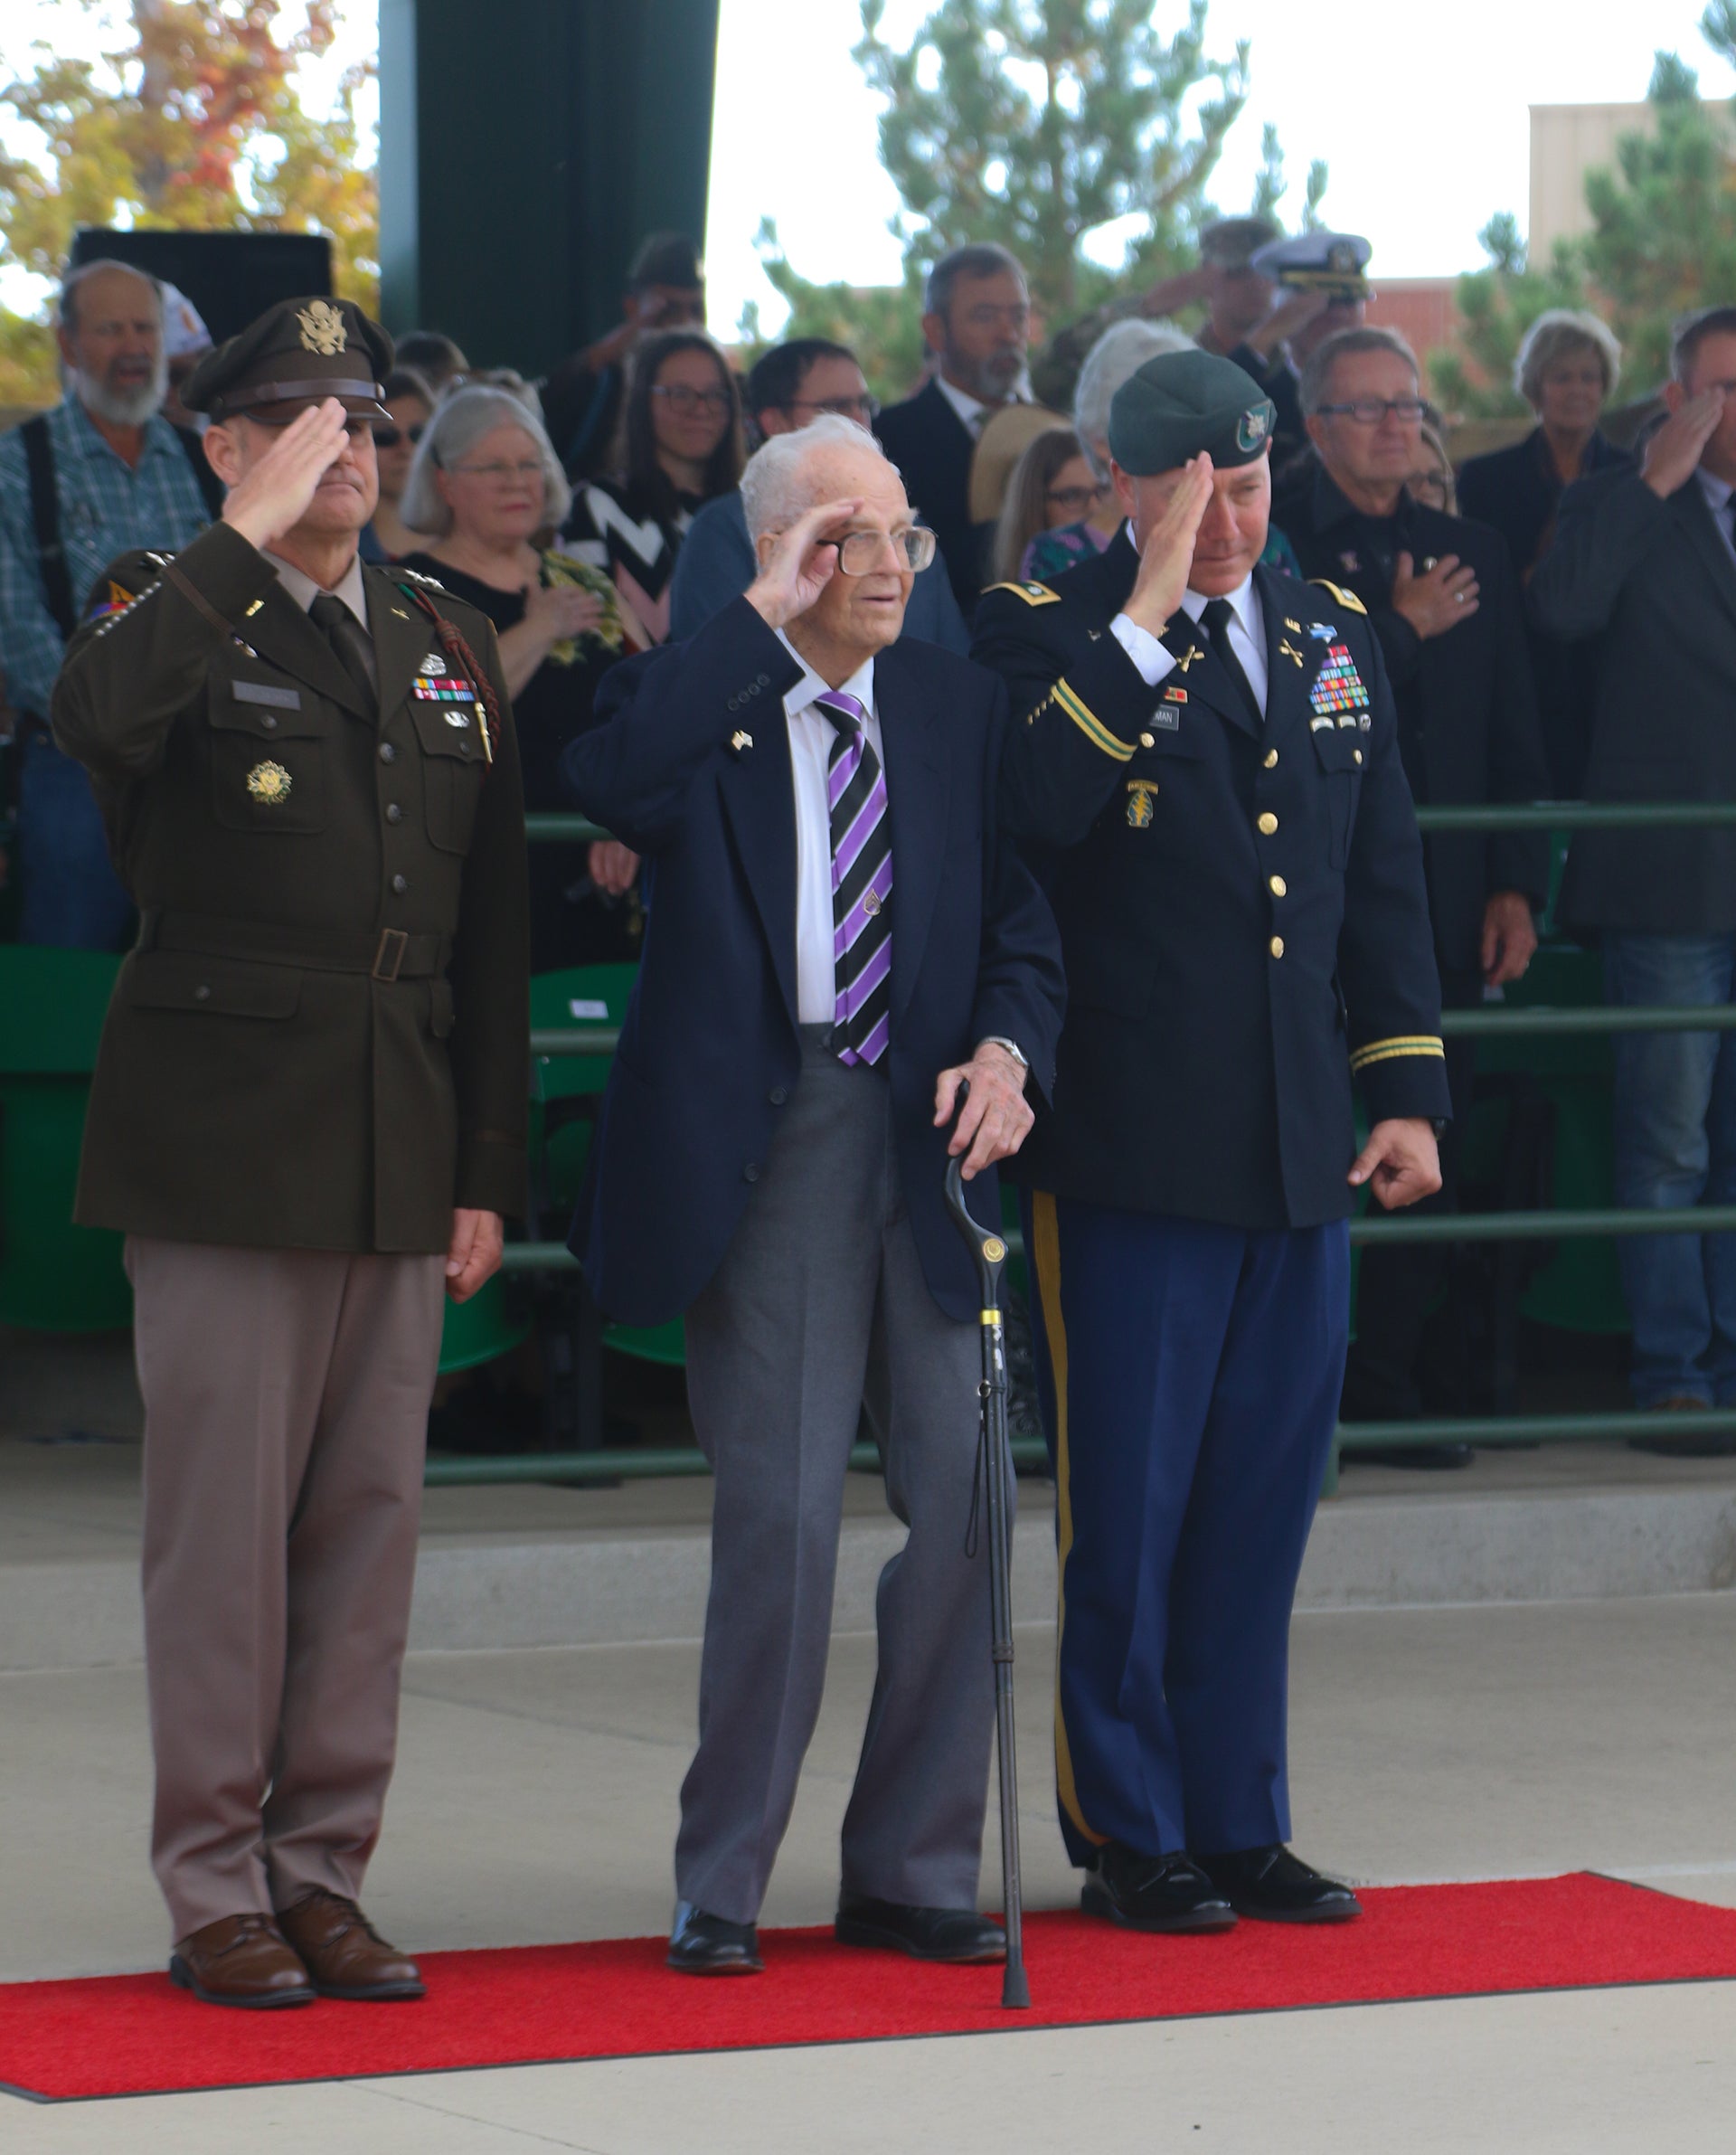 107-year-old WWII veteran finally receives Silver Star 77 years after his discharge